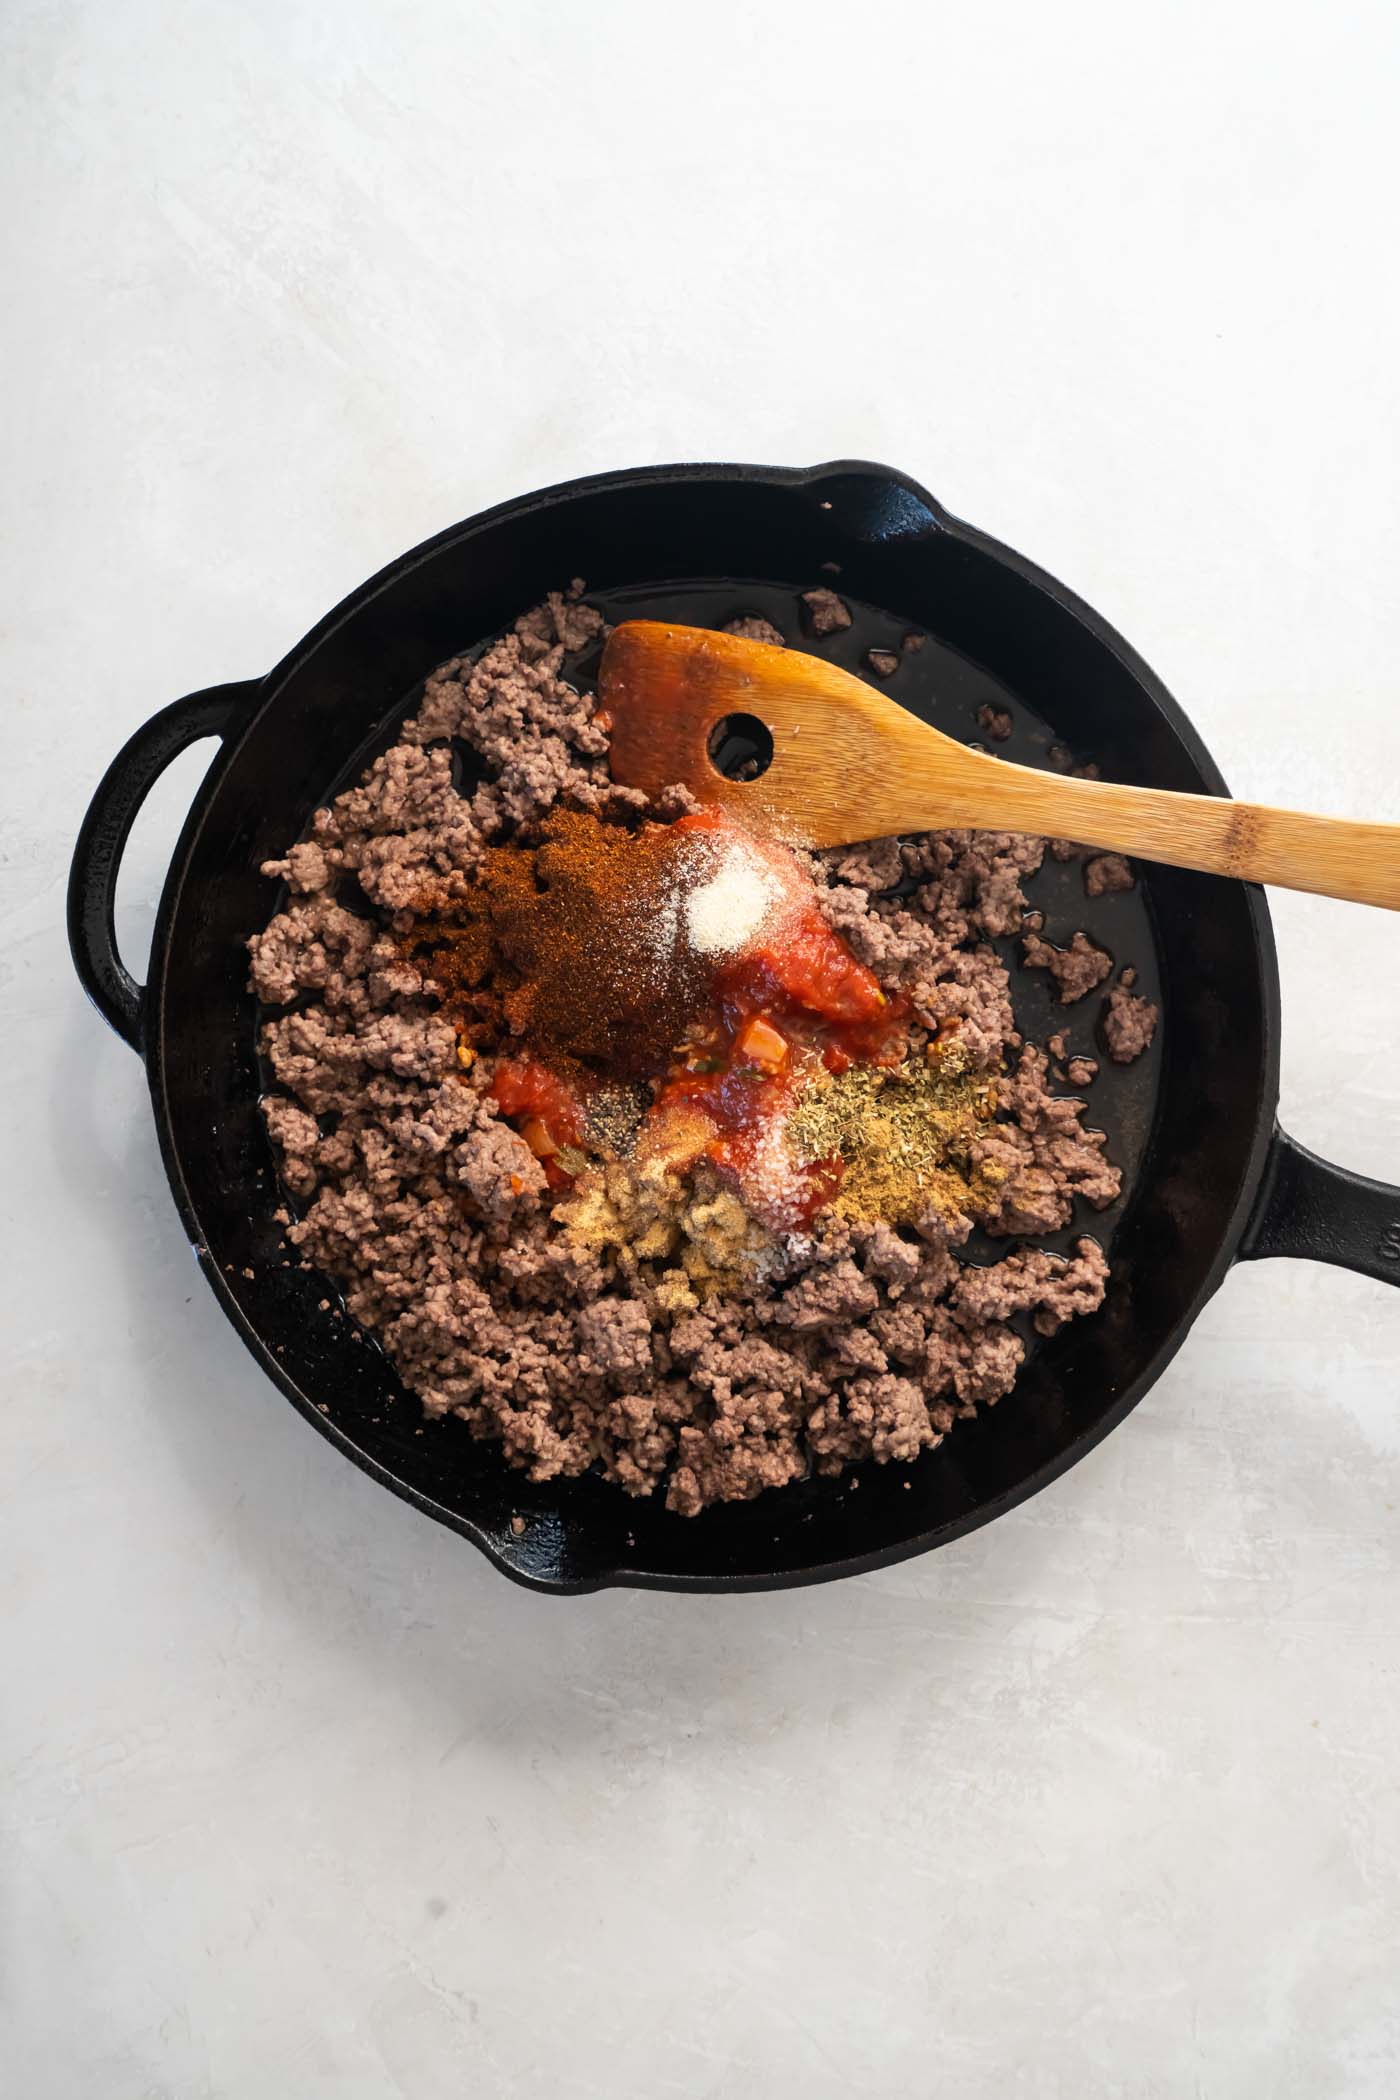 Tomato sauce, water and seasonings added to browned ground beef in skillet.